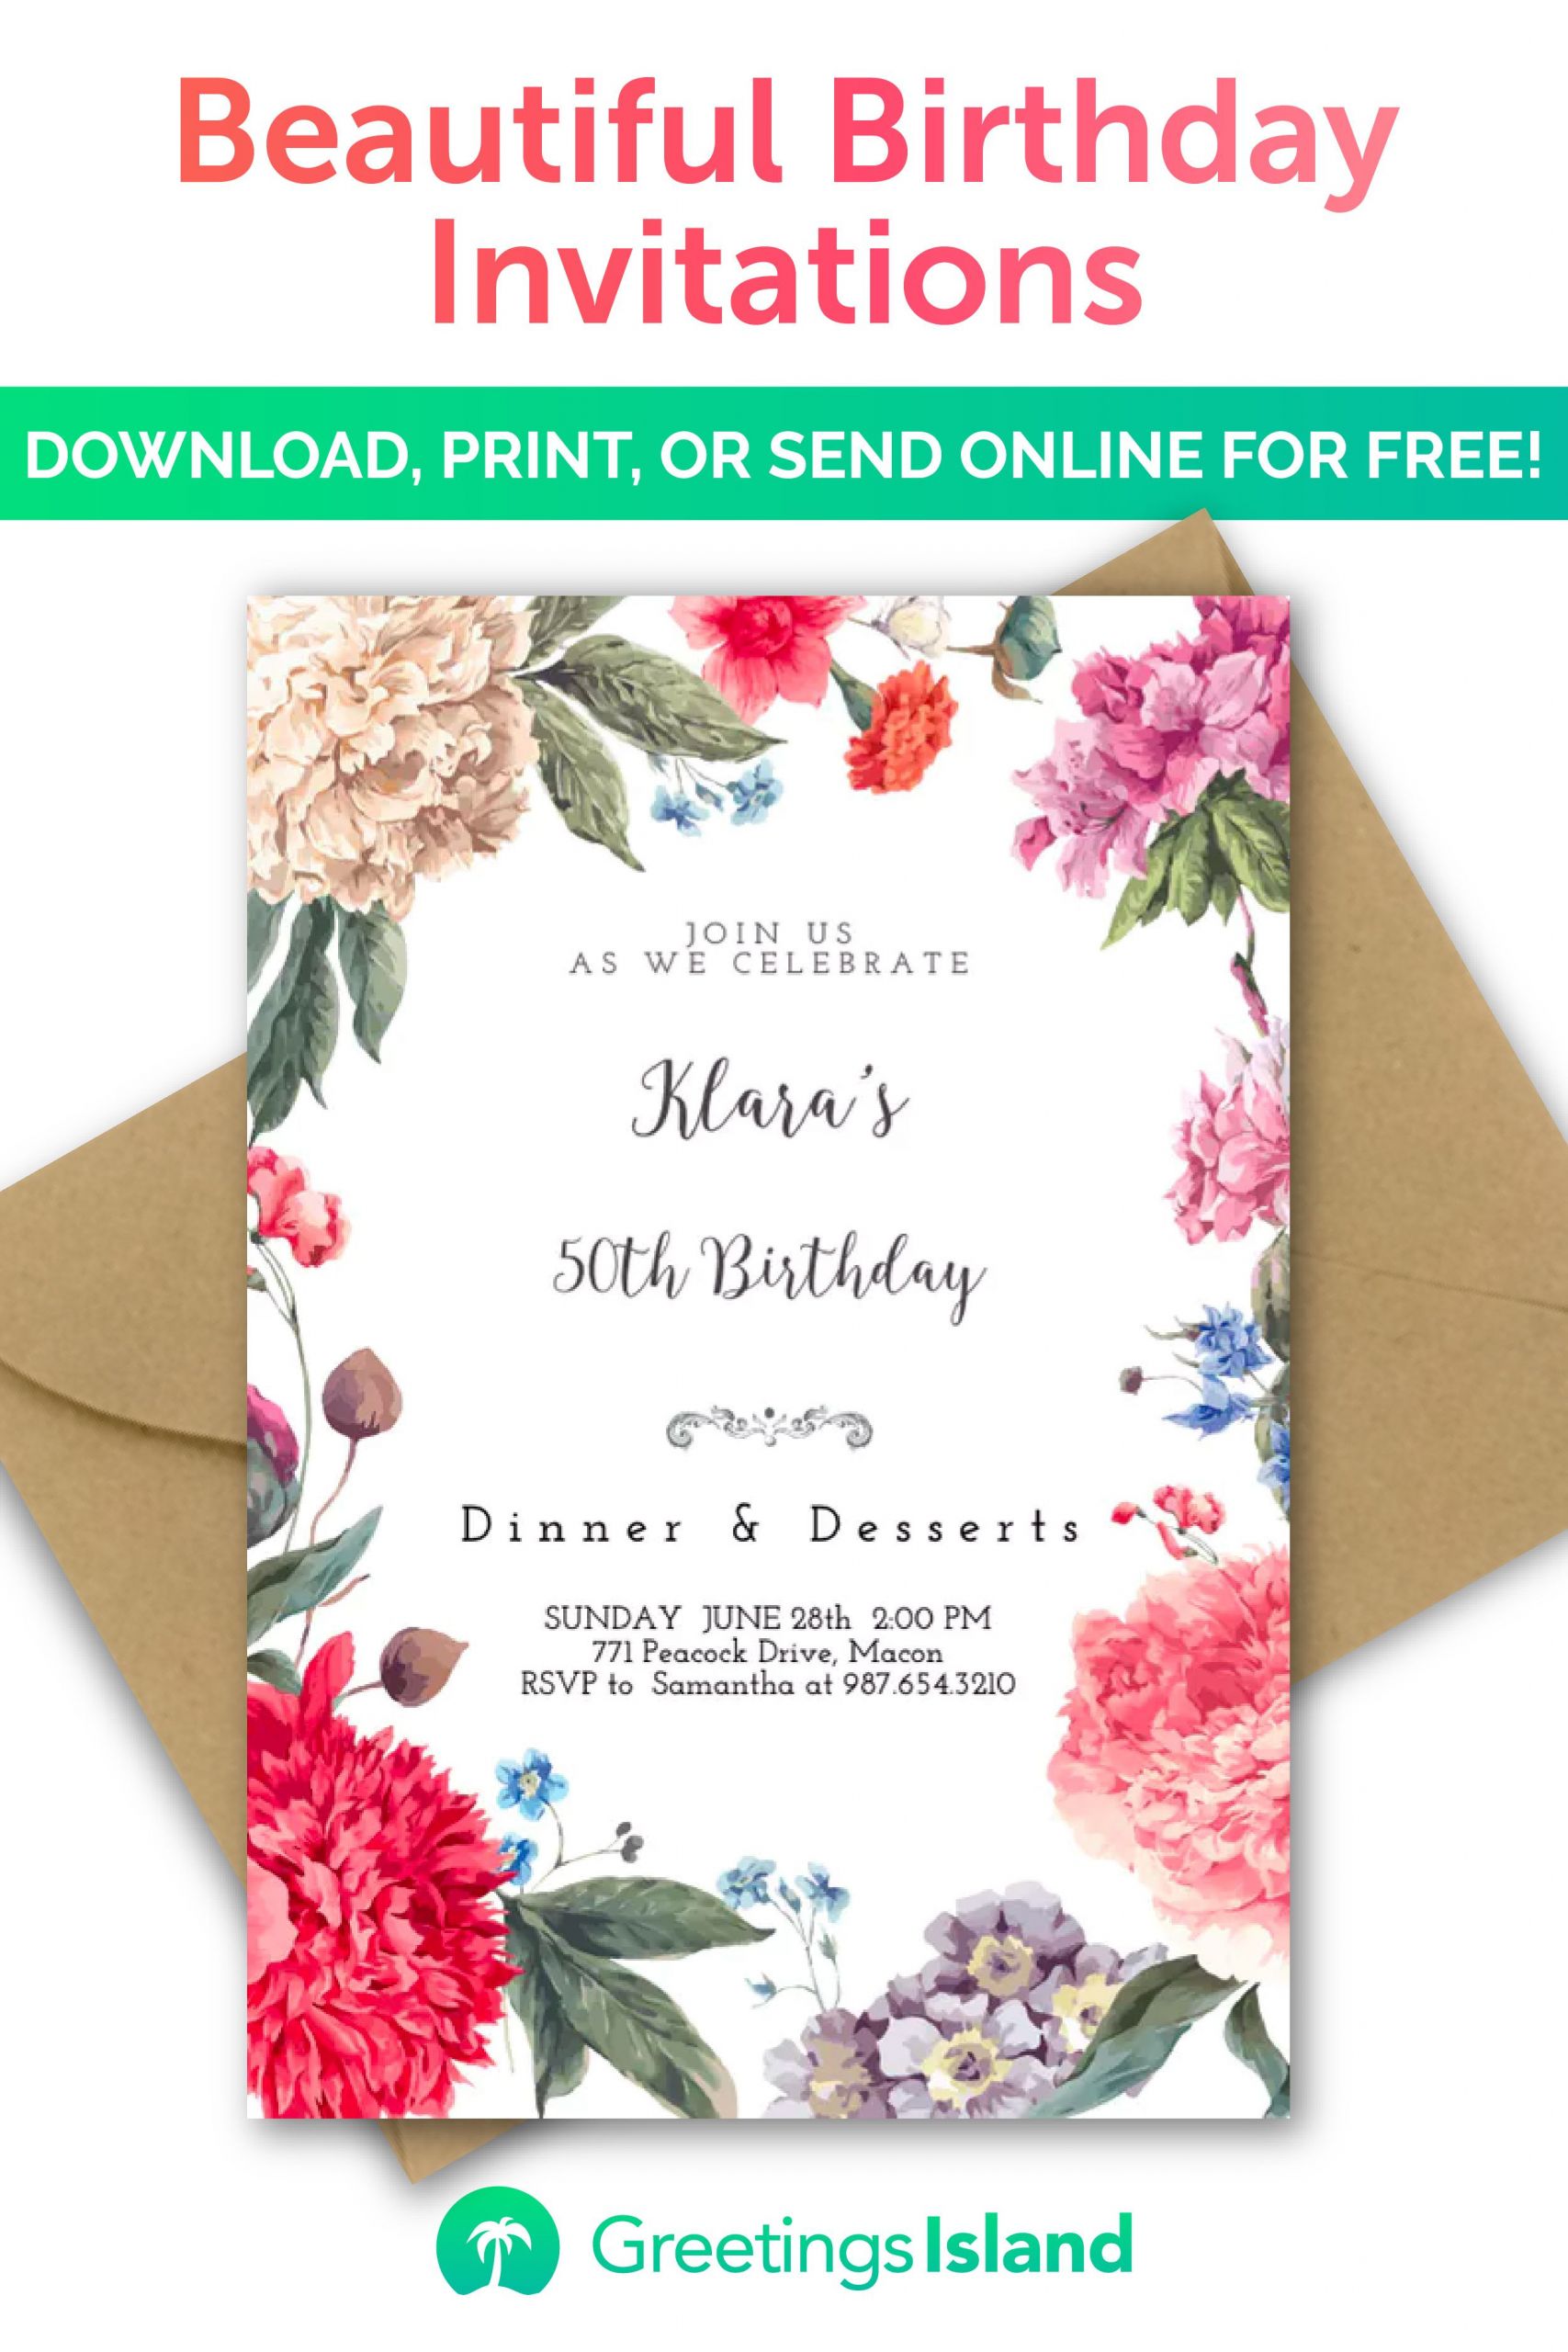 Make Your Own Birthday Invitations
 Create your own birthday invitation in minutes Download